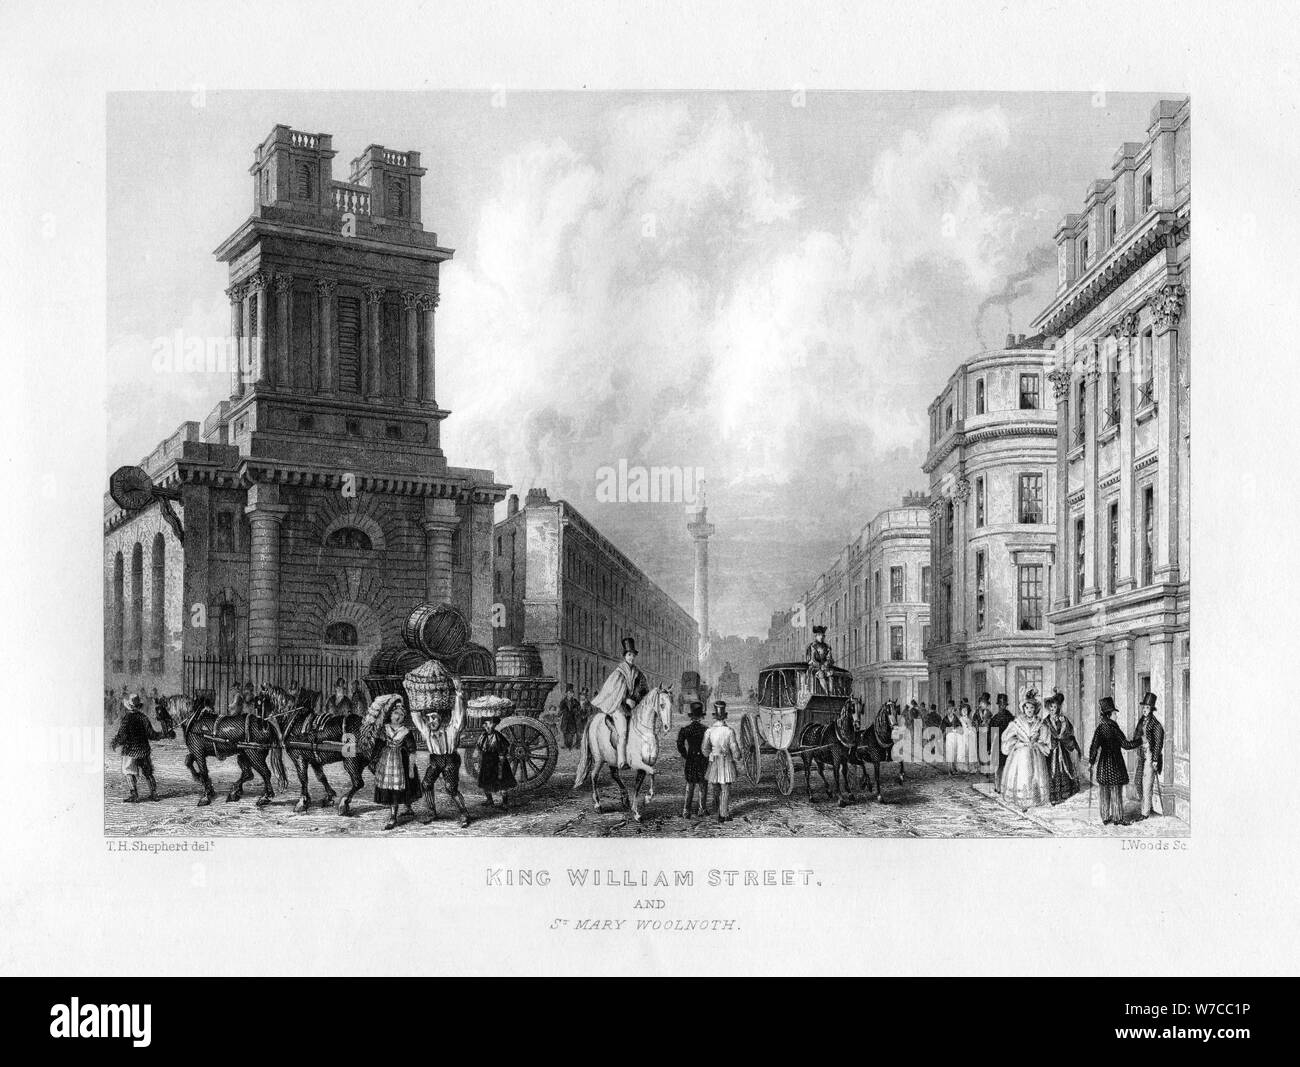 King William Street and St Mary Woolnoth, London, 19th century.Artist: J Woods Stock Photo